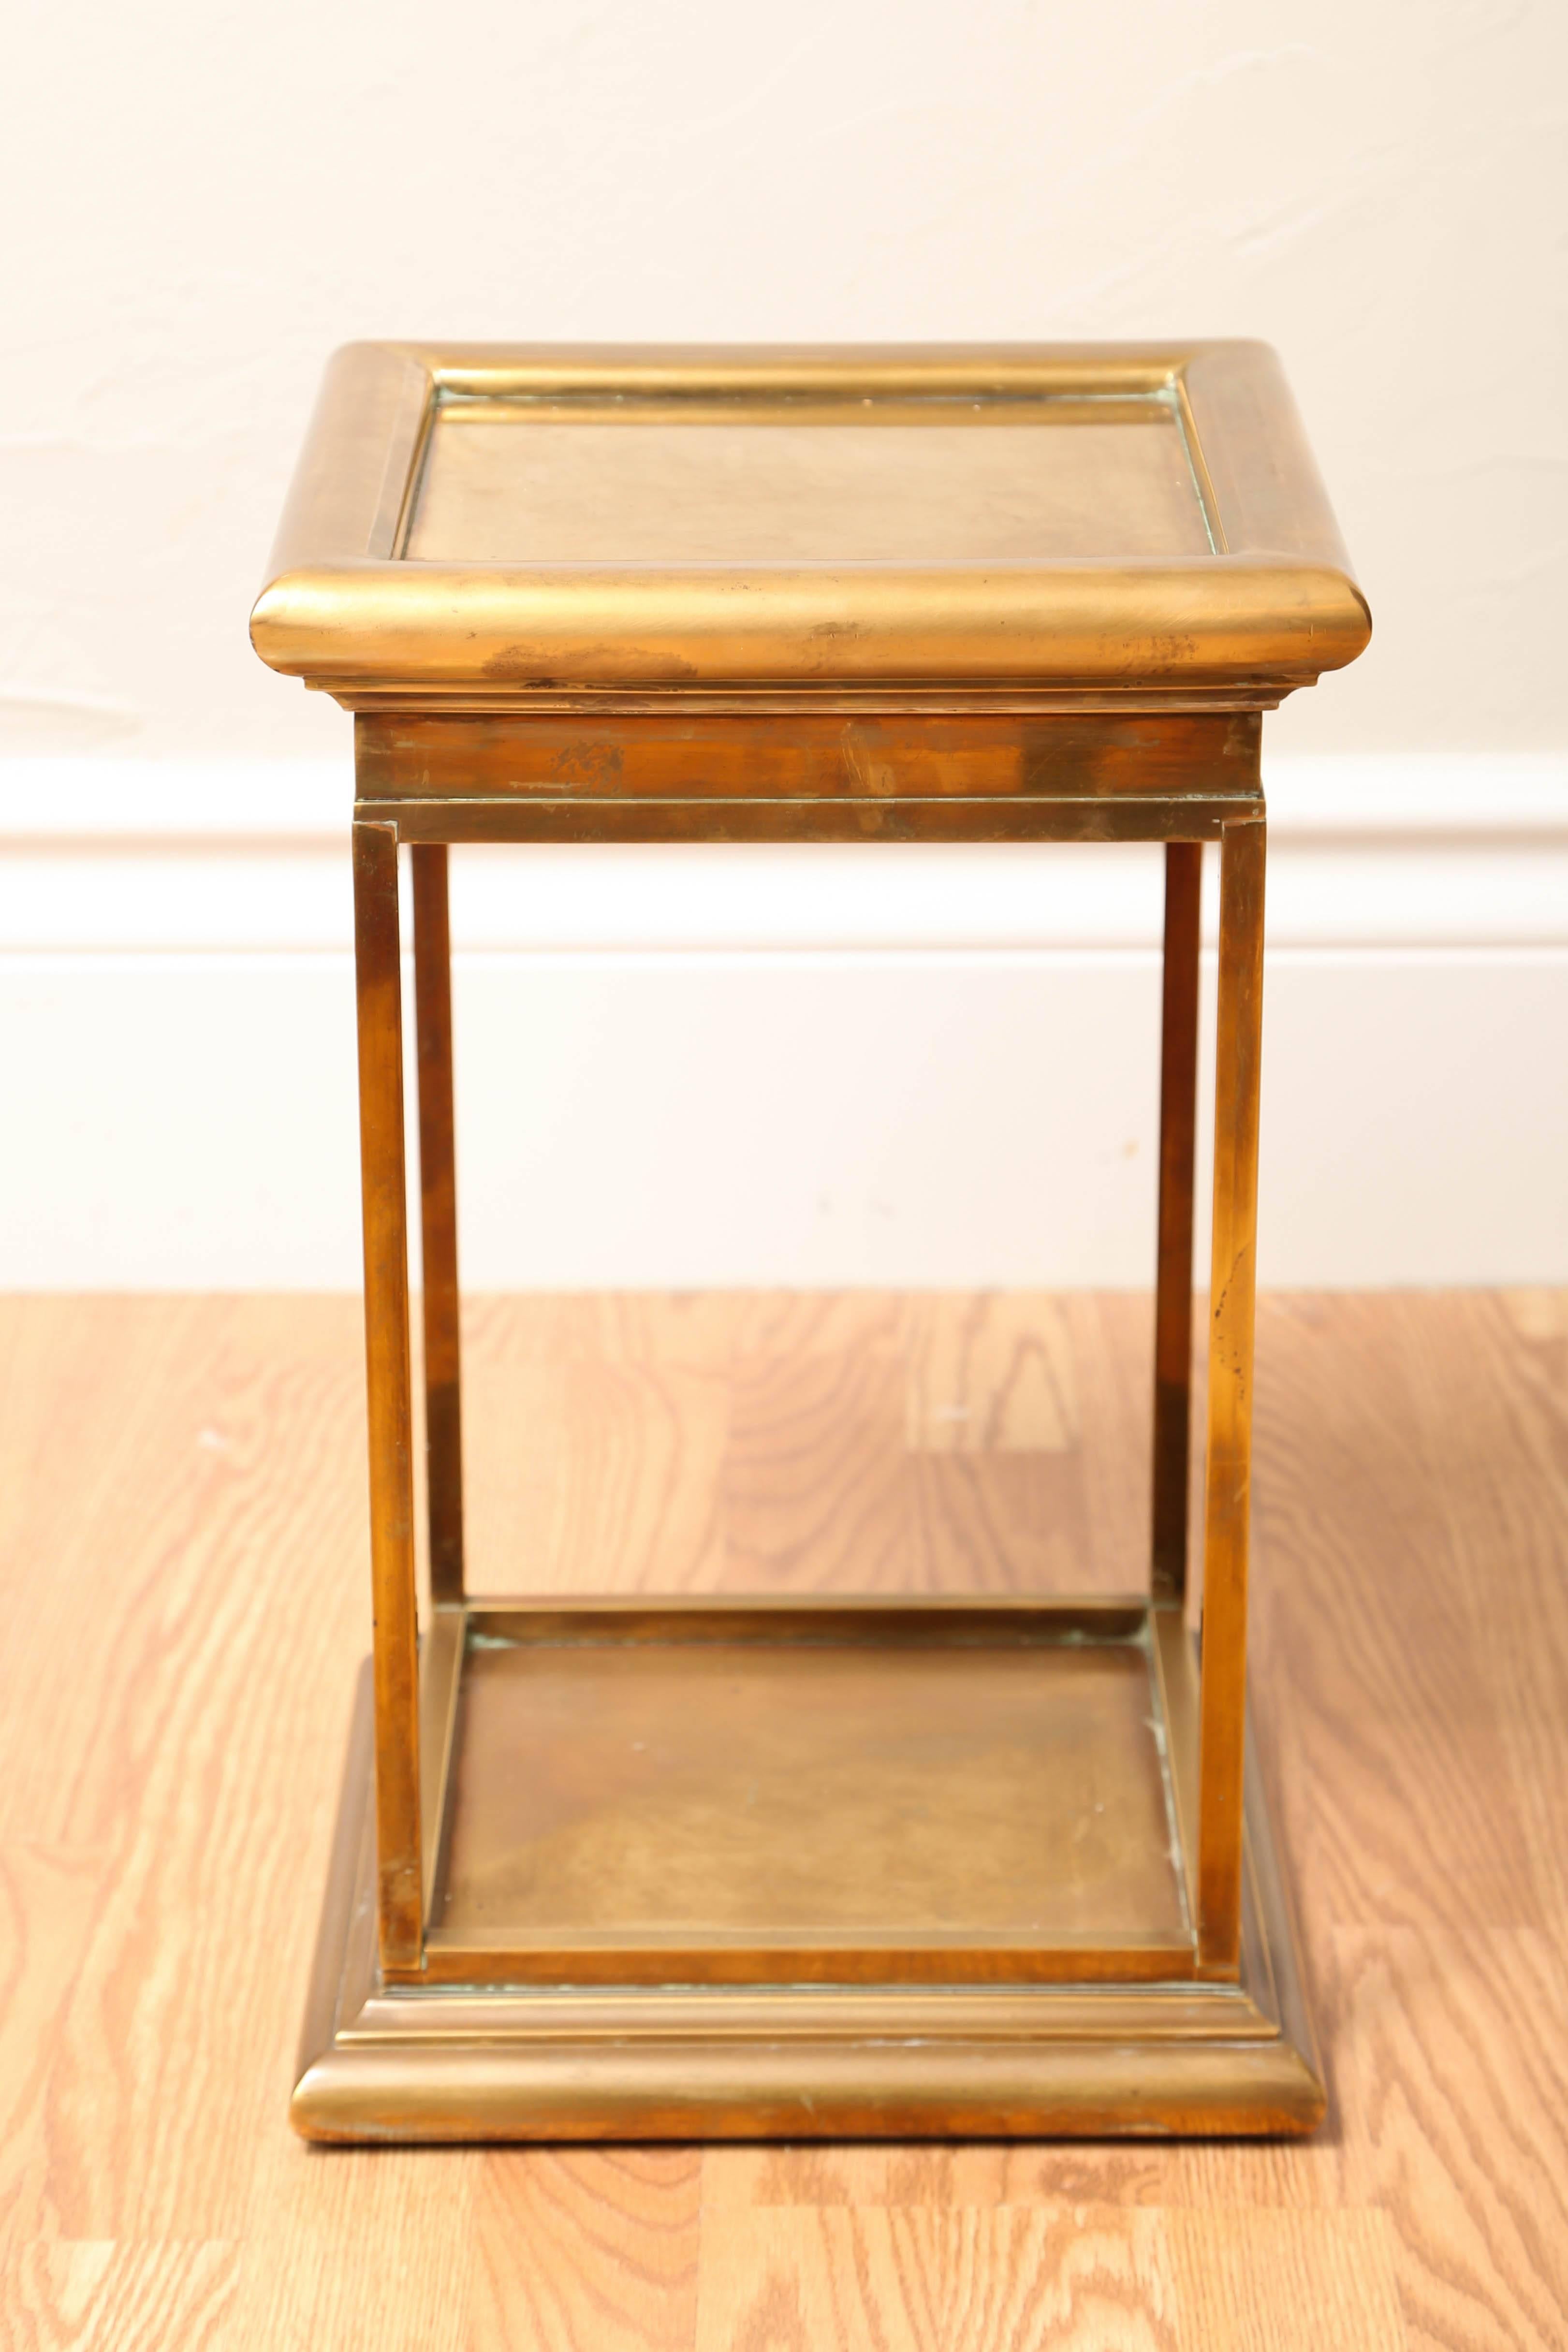 Solid brass accent tables with a lovely natural patina by Chapman. Could be used as pedestals.